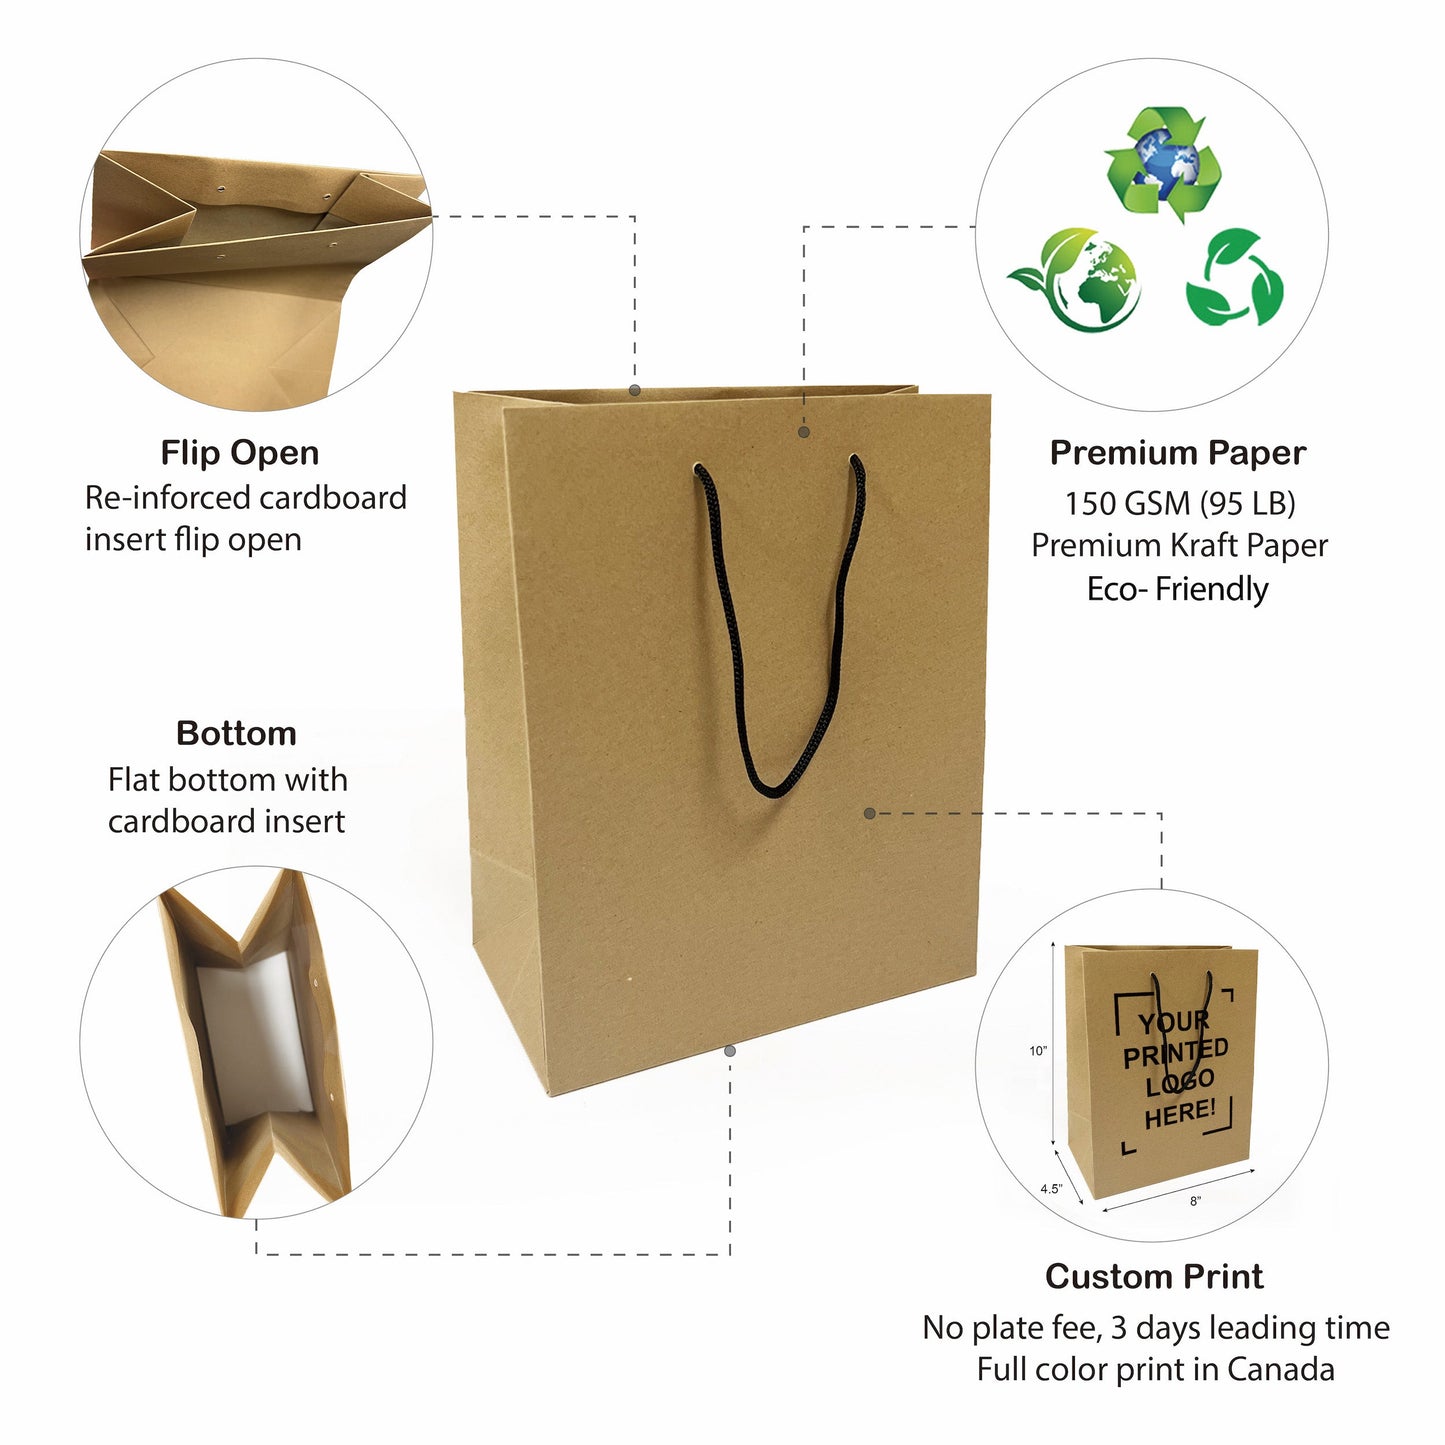 150 Pcs, Cub,  8x4.75x10.25 inches, Euro Tote Paper Bags, with Rope Handle